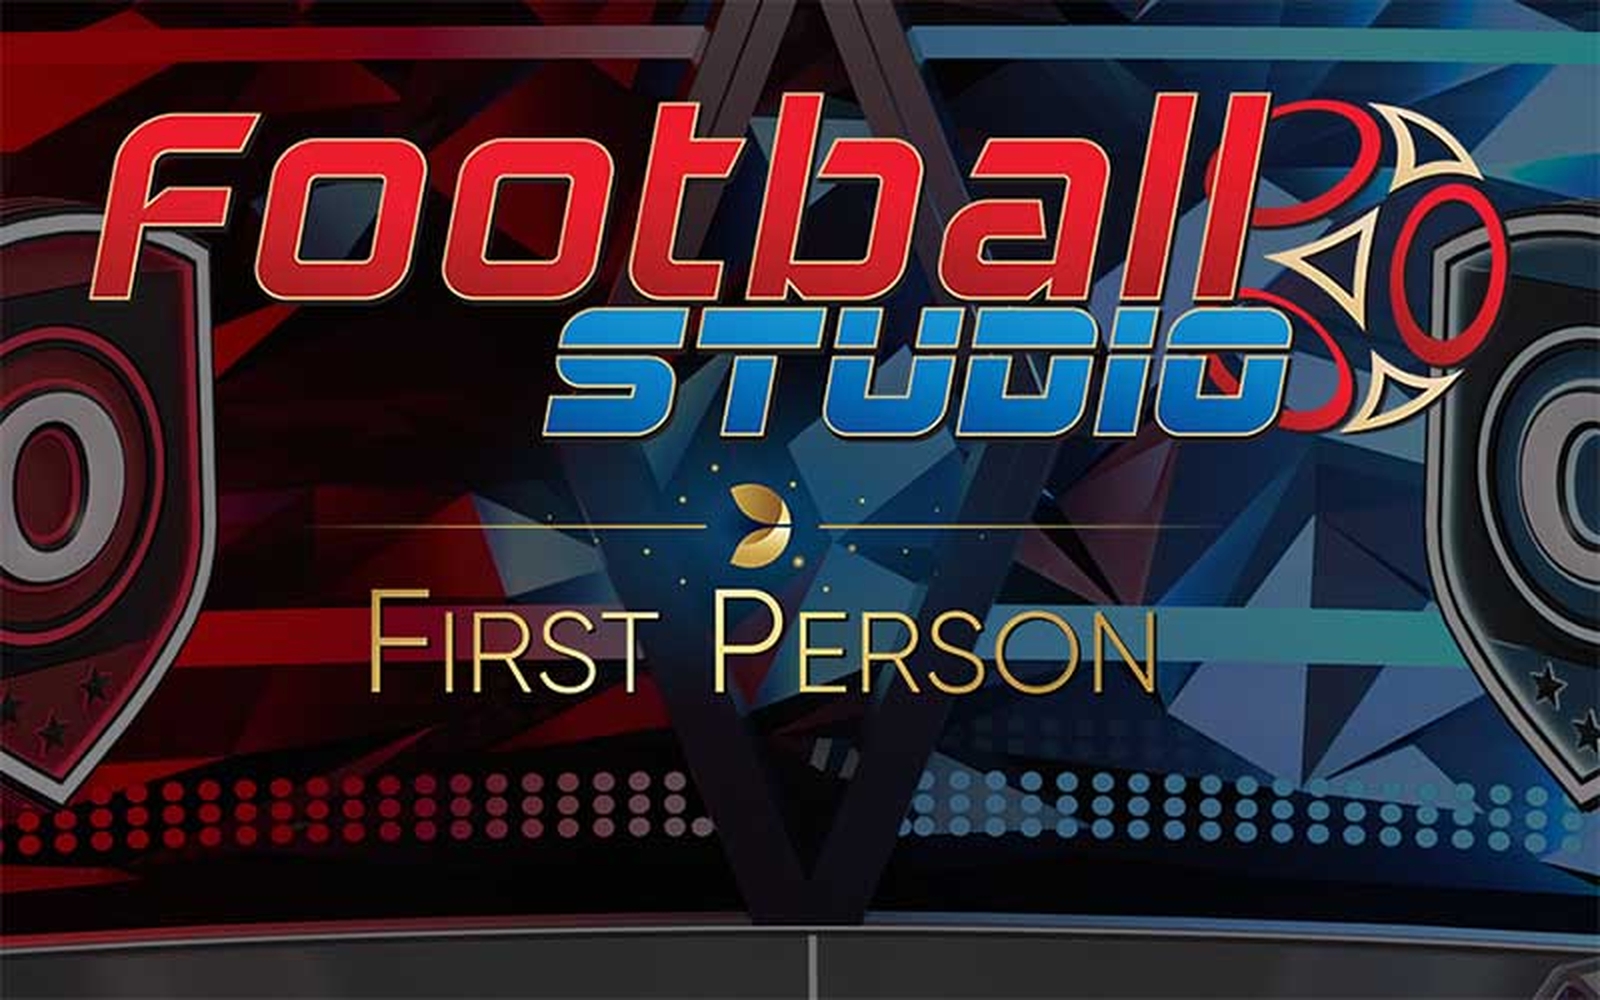 Football Studio First Person